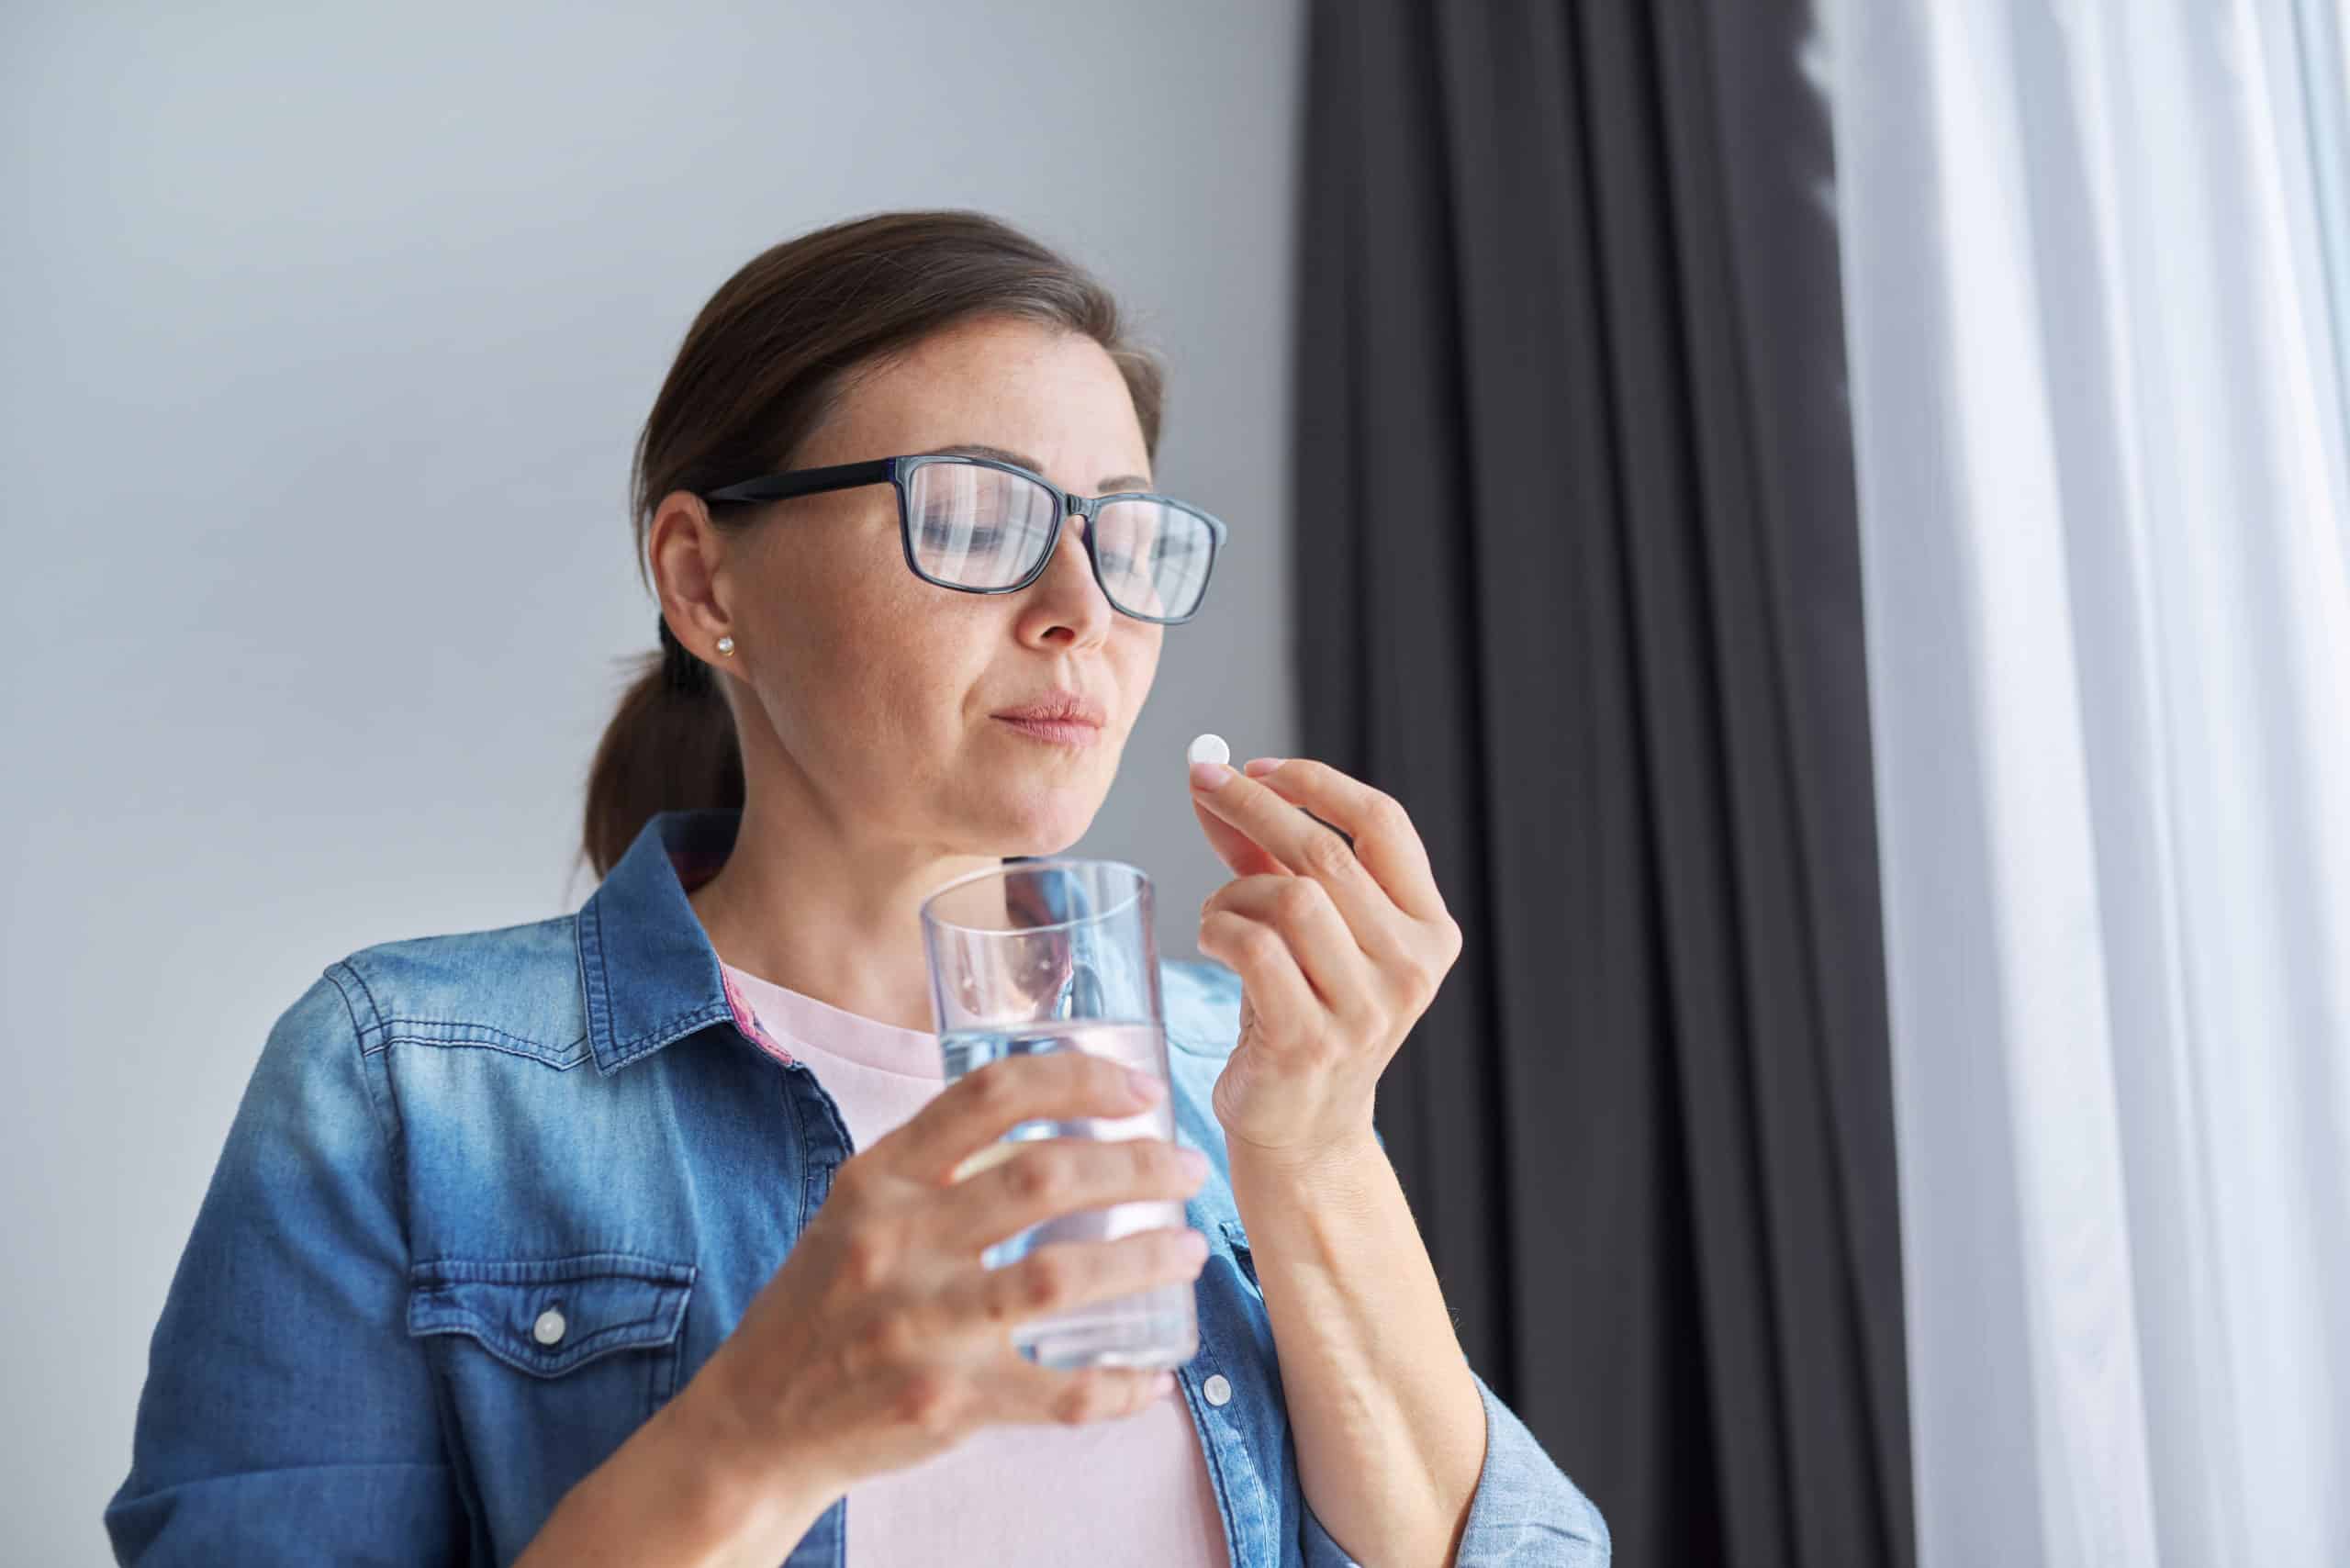 Older woman wearing glasses staring down at ambien, with a glass of water, contemplating if she should take it